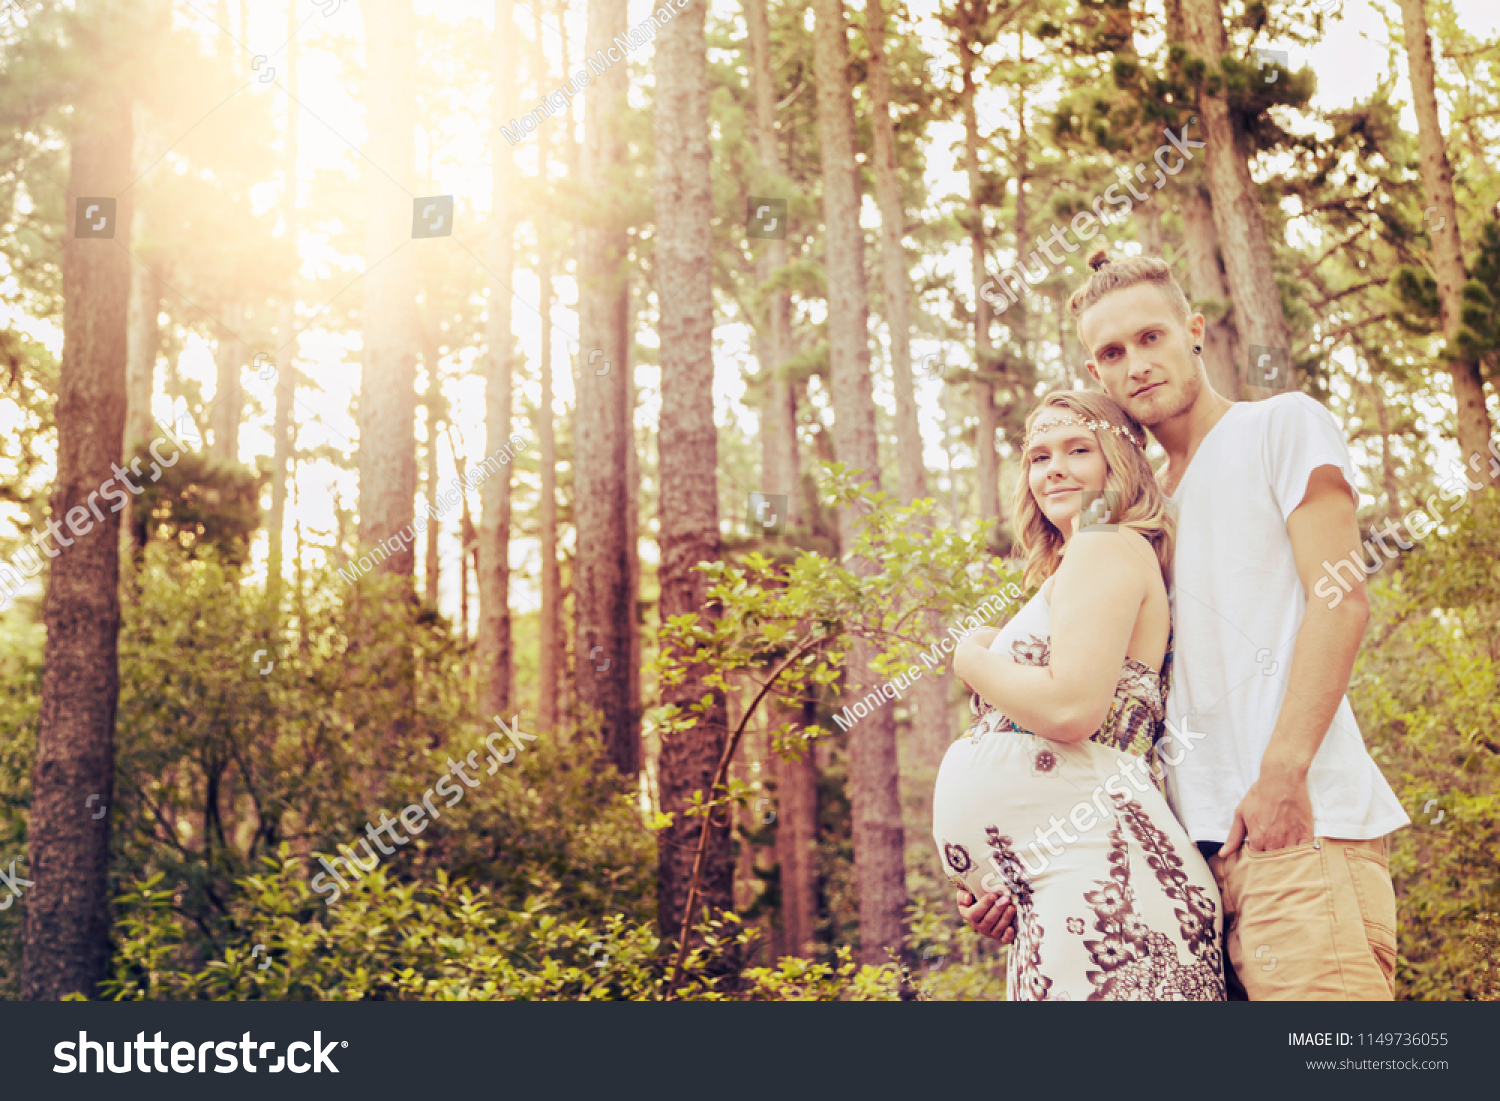 A young couple, - she very pregnant - walk through a sunny forest as she cradles her unborn child. #1149736055